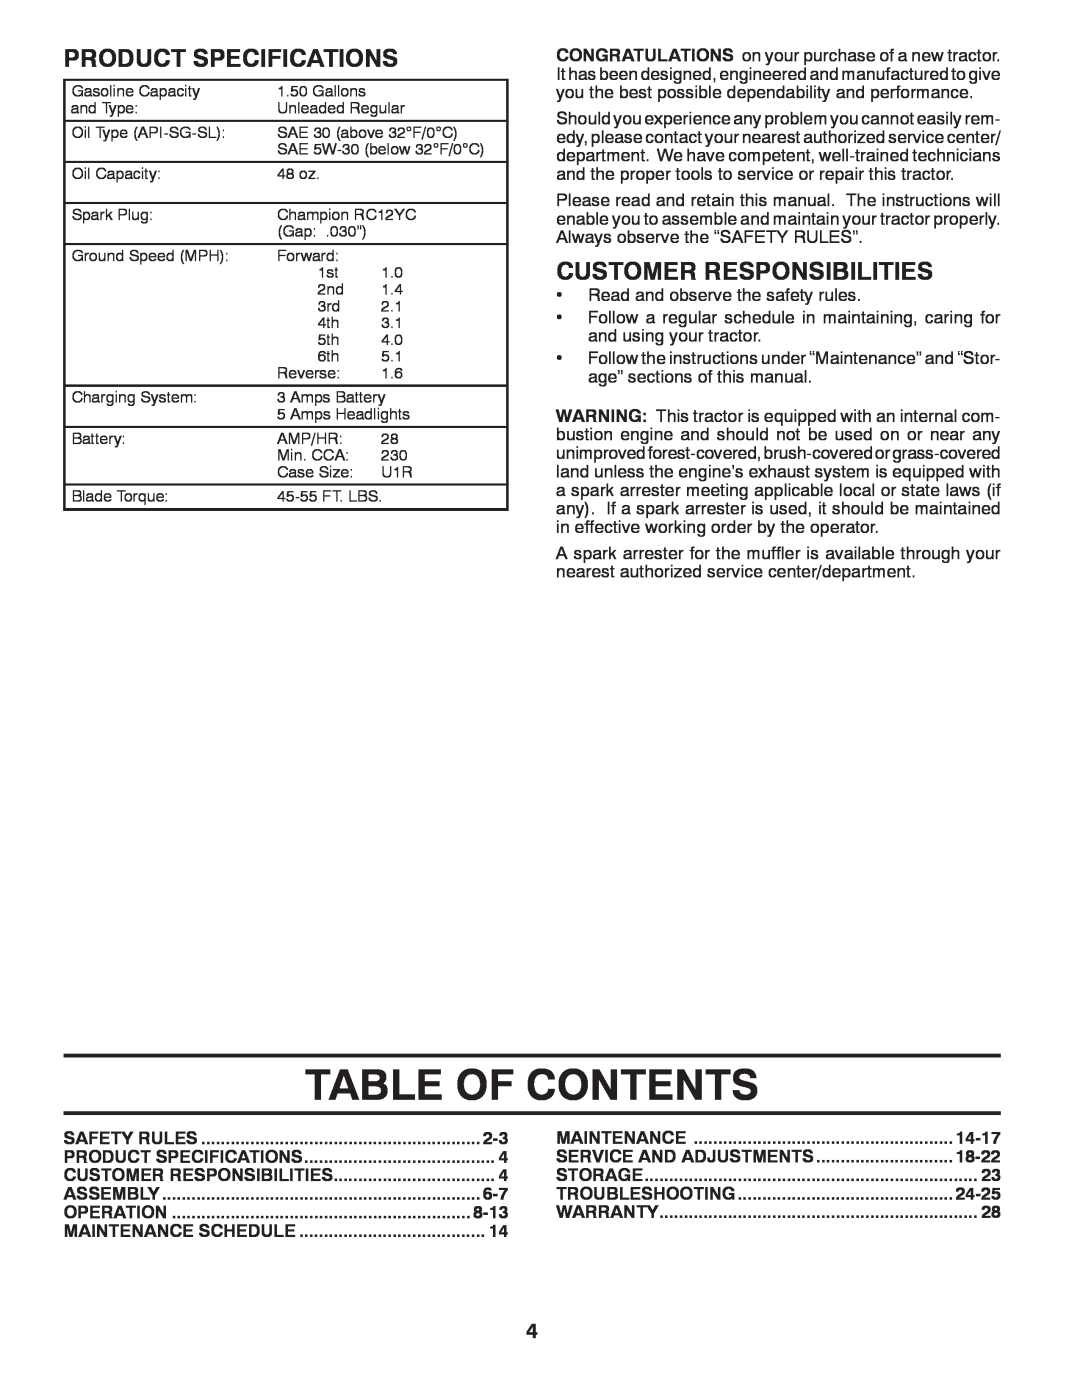 Poulan 438719, 96012011000 manual Table Of Contents, Product Specifications, Customer Responsibilities 